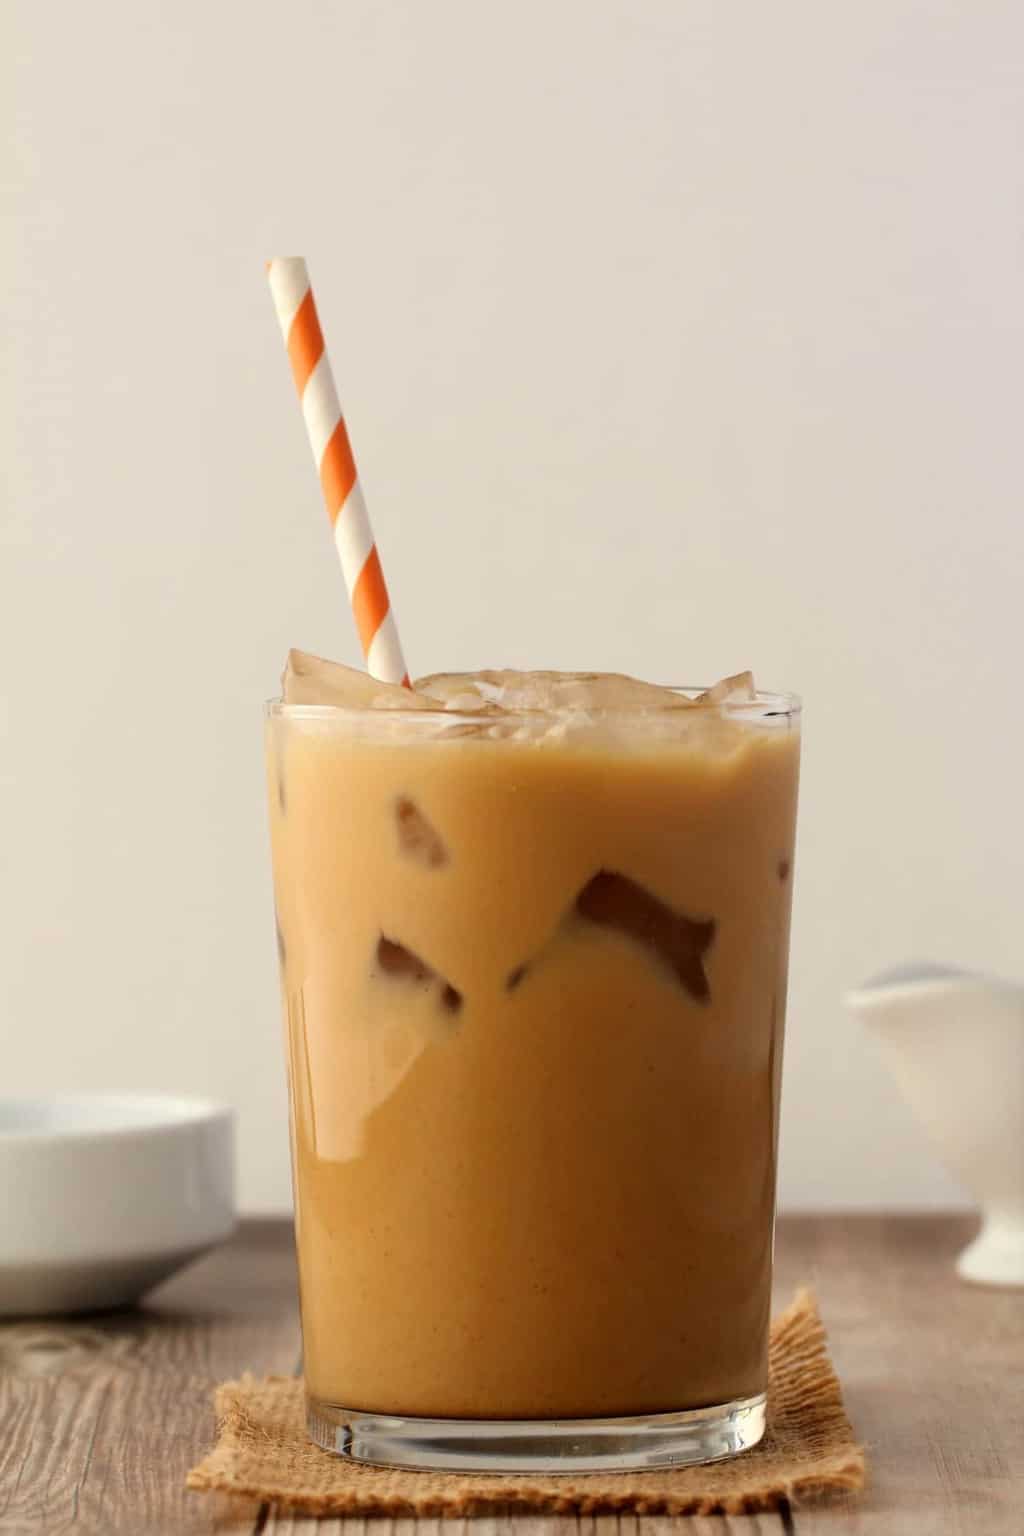 Vegan Iced Coffee in a glass with an orange and white striped straw. 